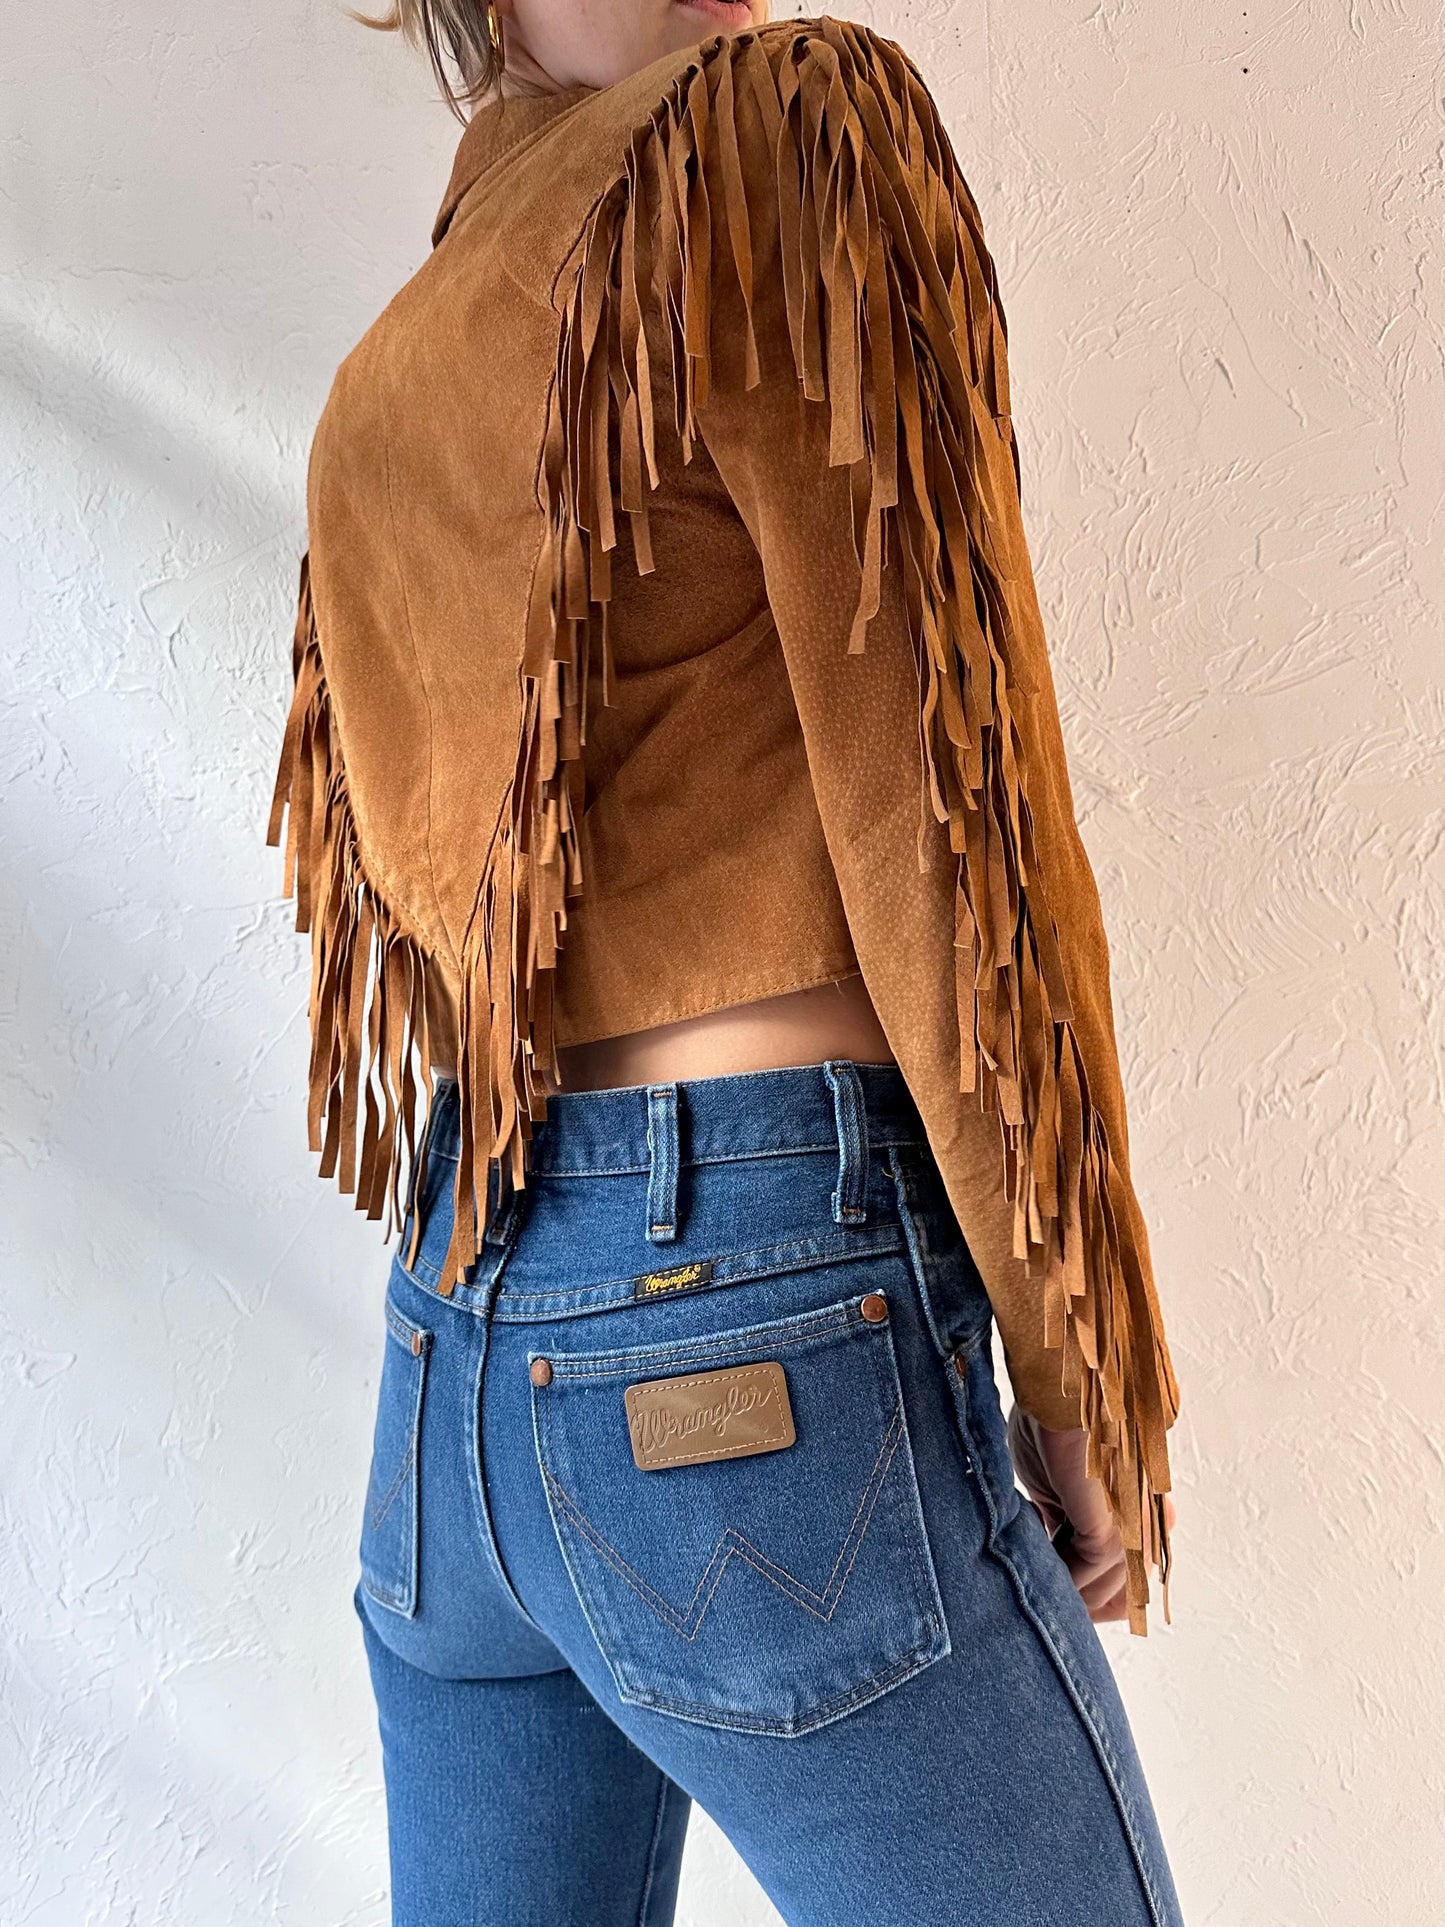 80s 'Zebra' Brown Suede Leather Fringe Jacket / Small